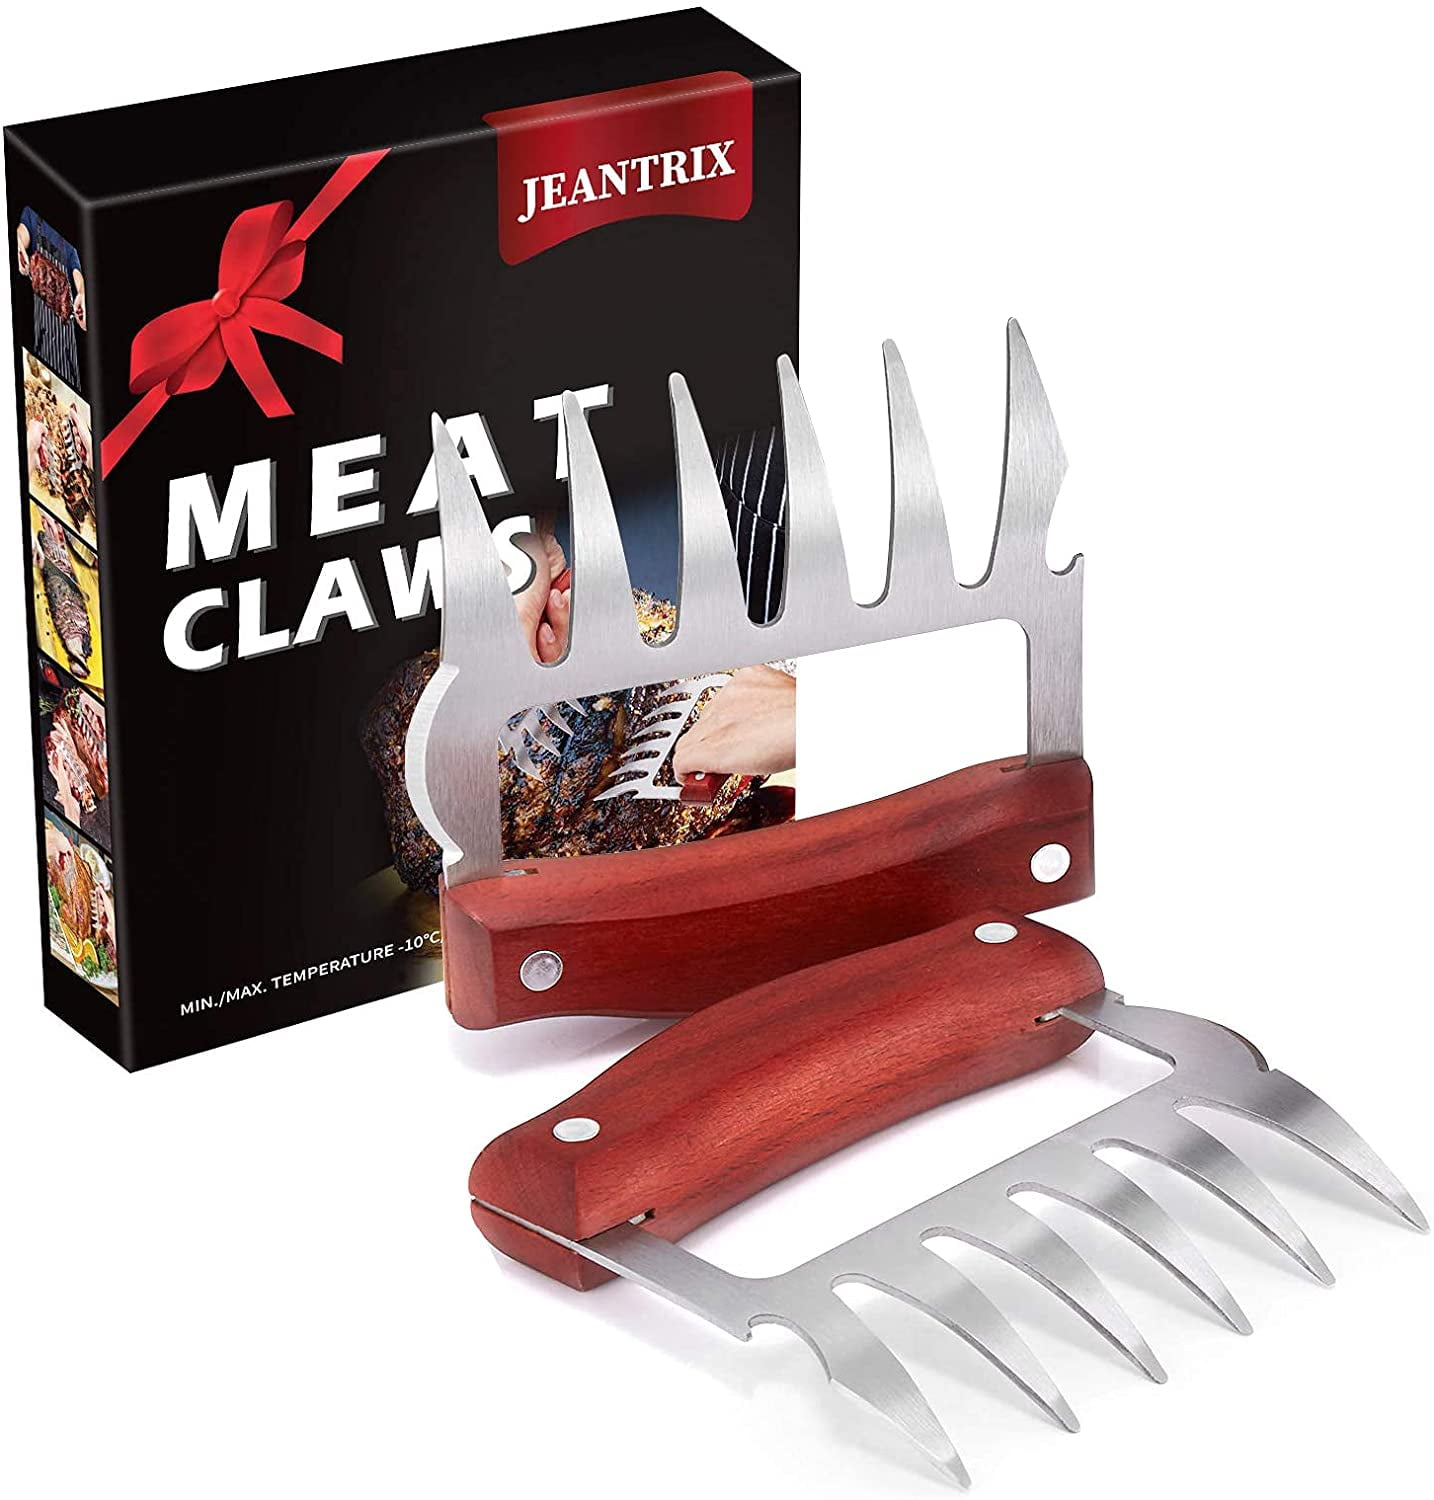 GRILLMATIC - Meat Shredder Claws - Professional, Stainless Steel, Easy to Use, Lightweight, Heat Resistant Claws for Pulling, Shredding, Lifting and